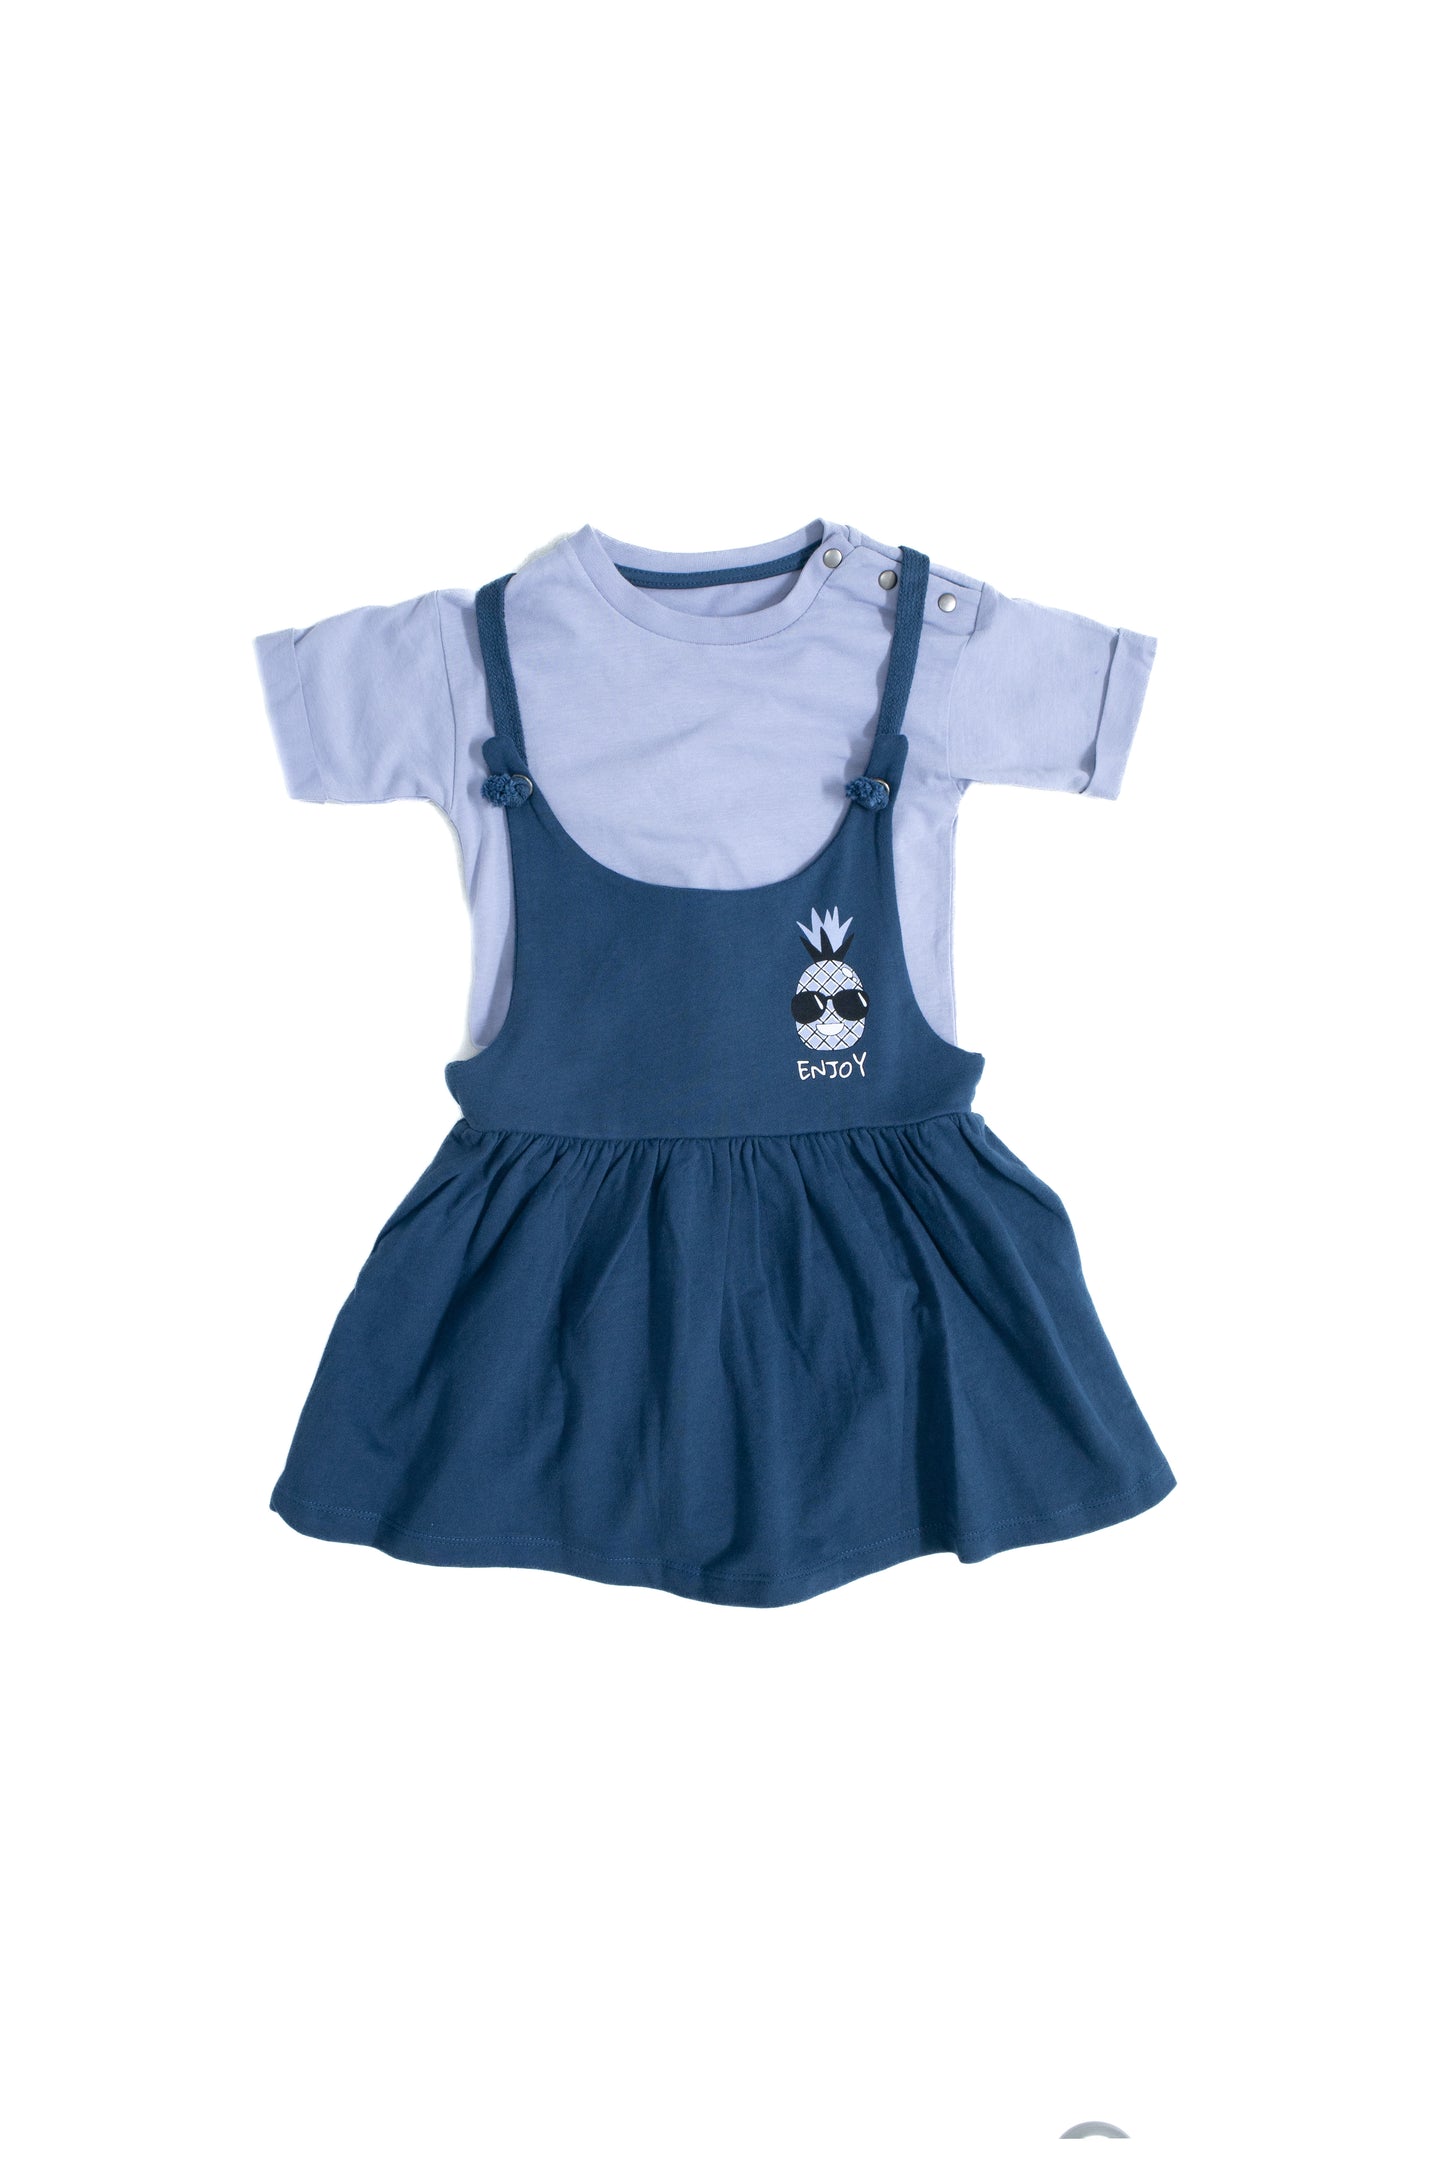 100% Cotton Printed Detailed Children's Strap Dress and T-Shirt